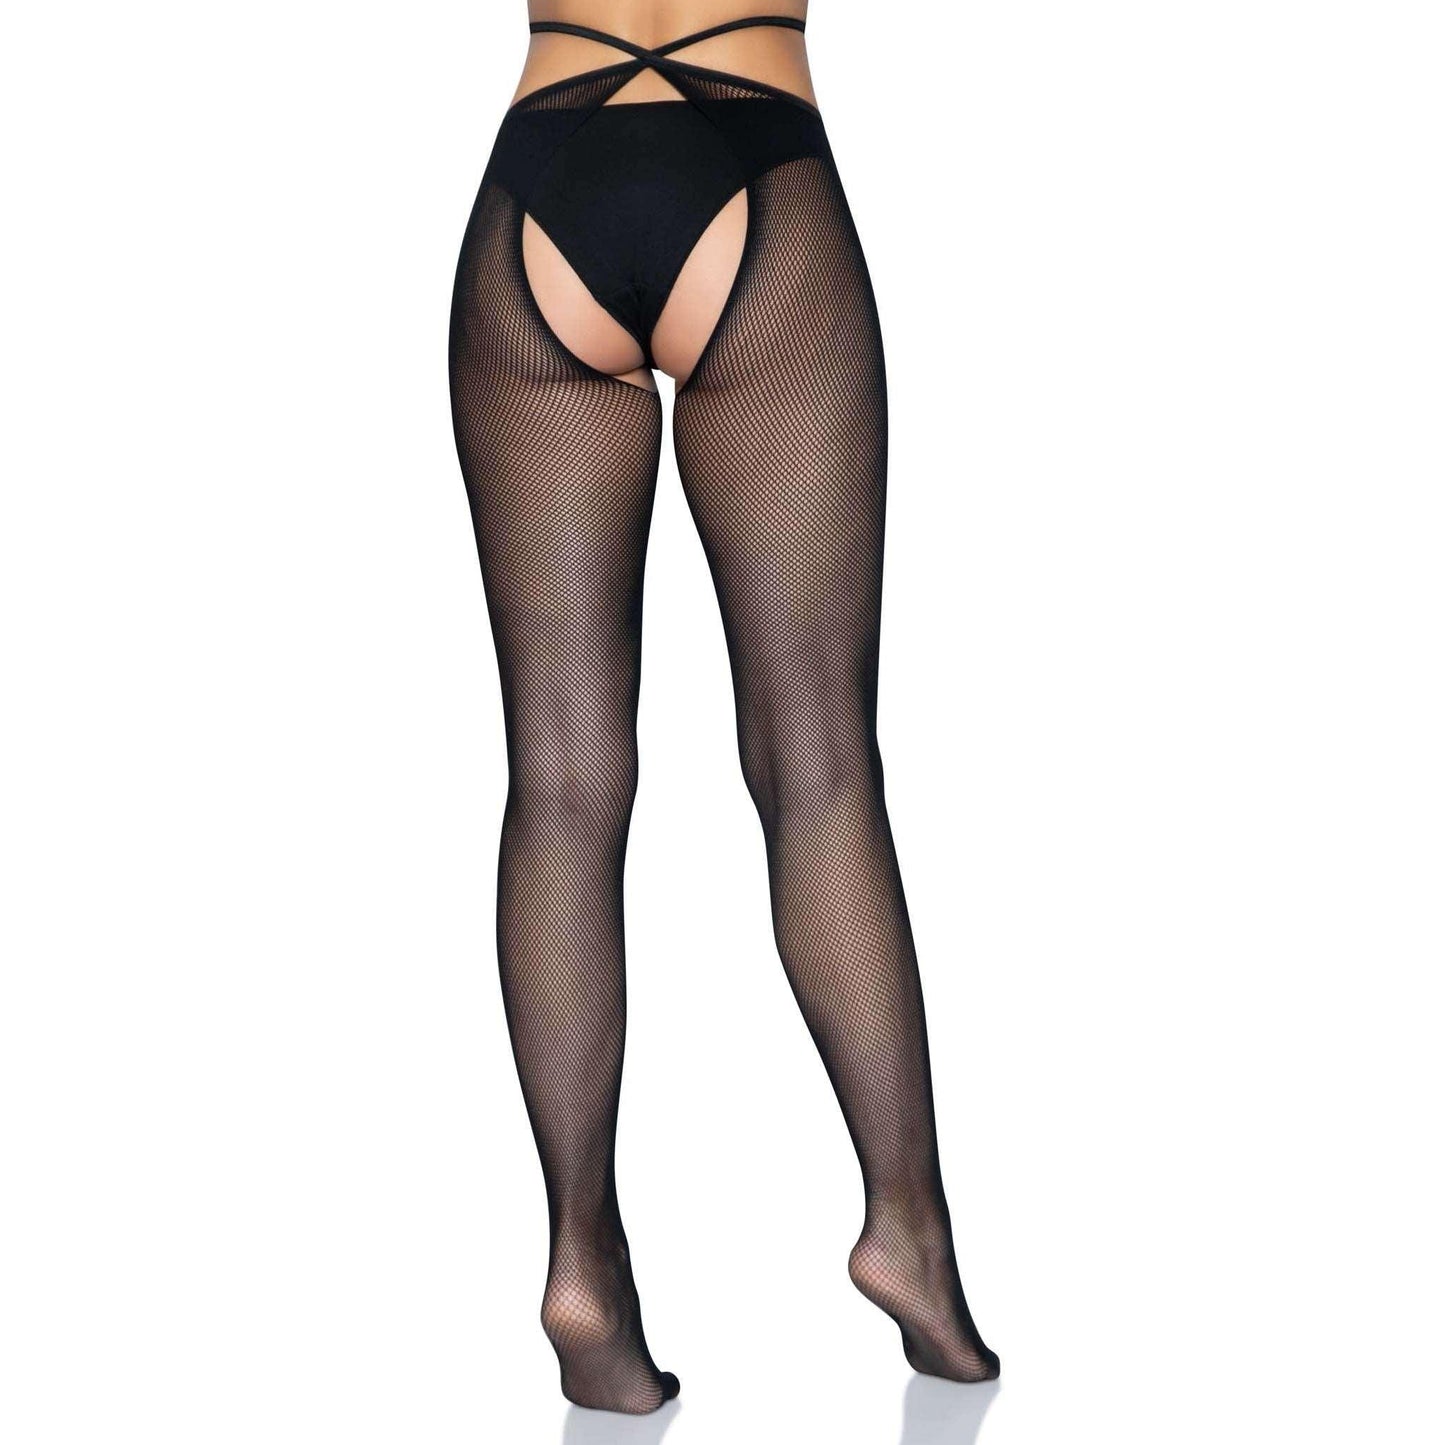 Crotchless Fishnet Tights